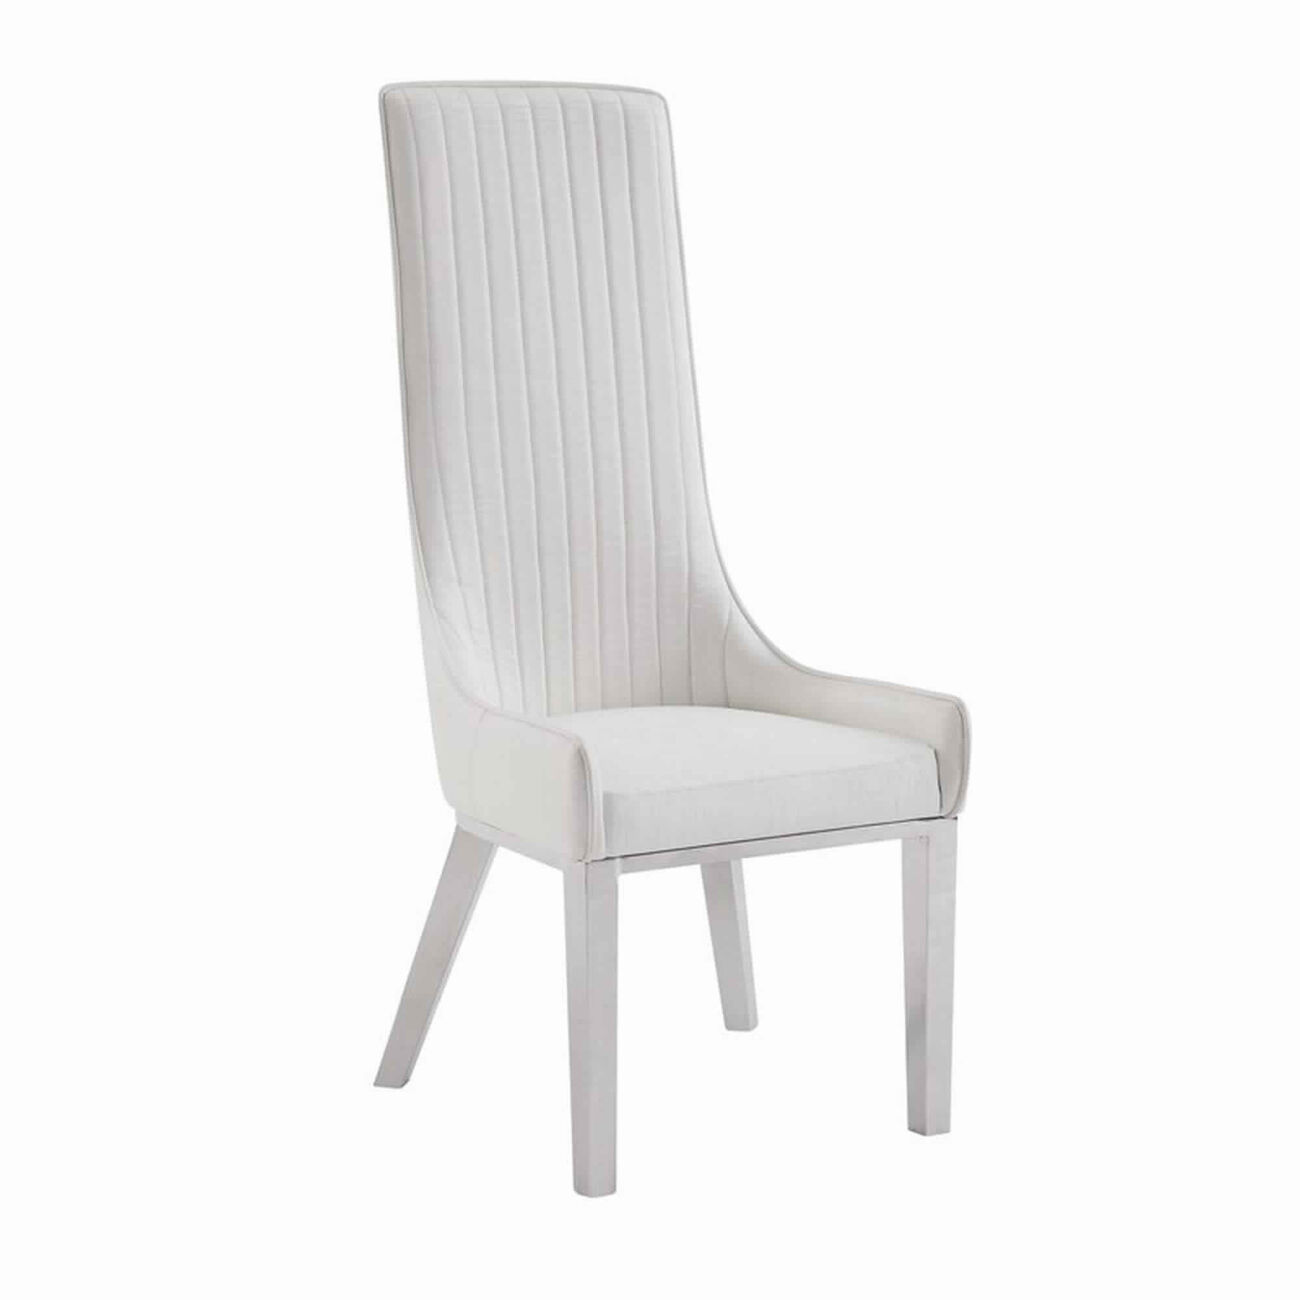 Leatherette Dining Chair with Vertically Stitched Backrest, Set of 2, White